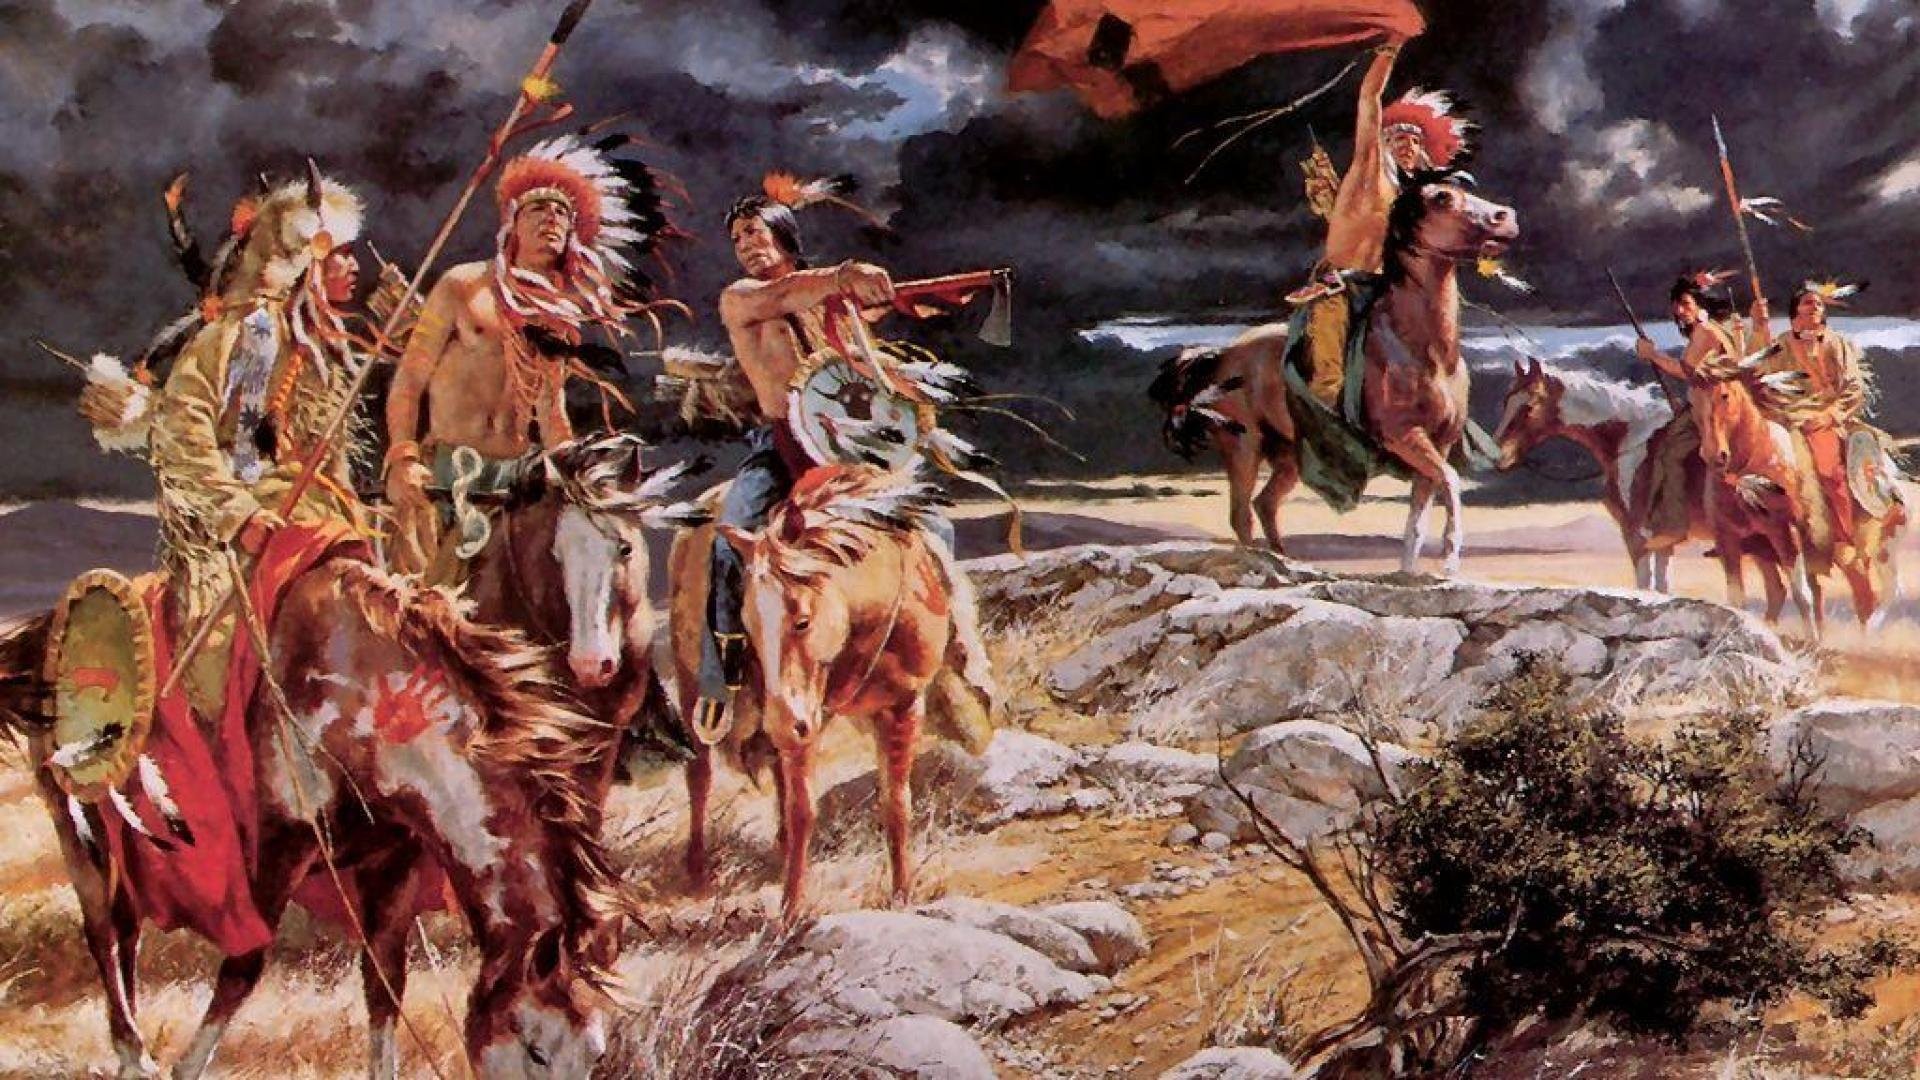 free native american wallpapers,mythology,art,conquistador,middle ages,painting